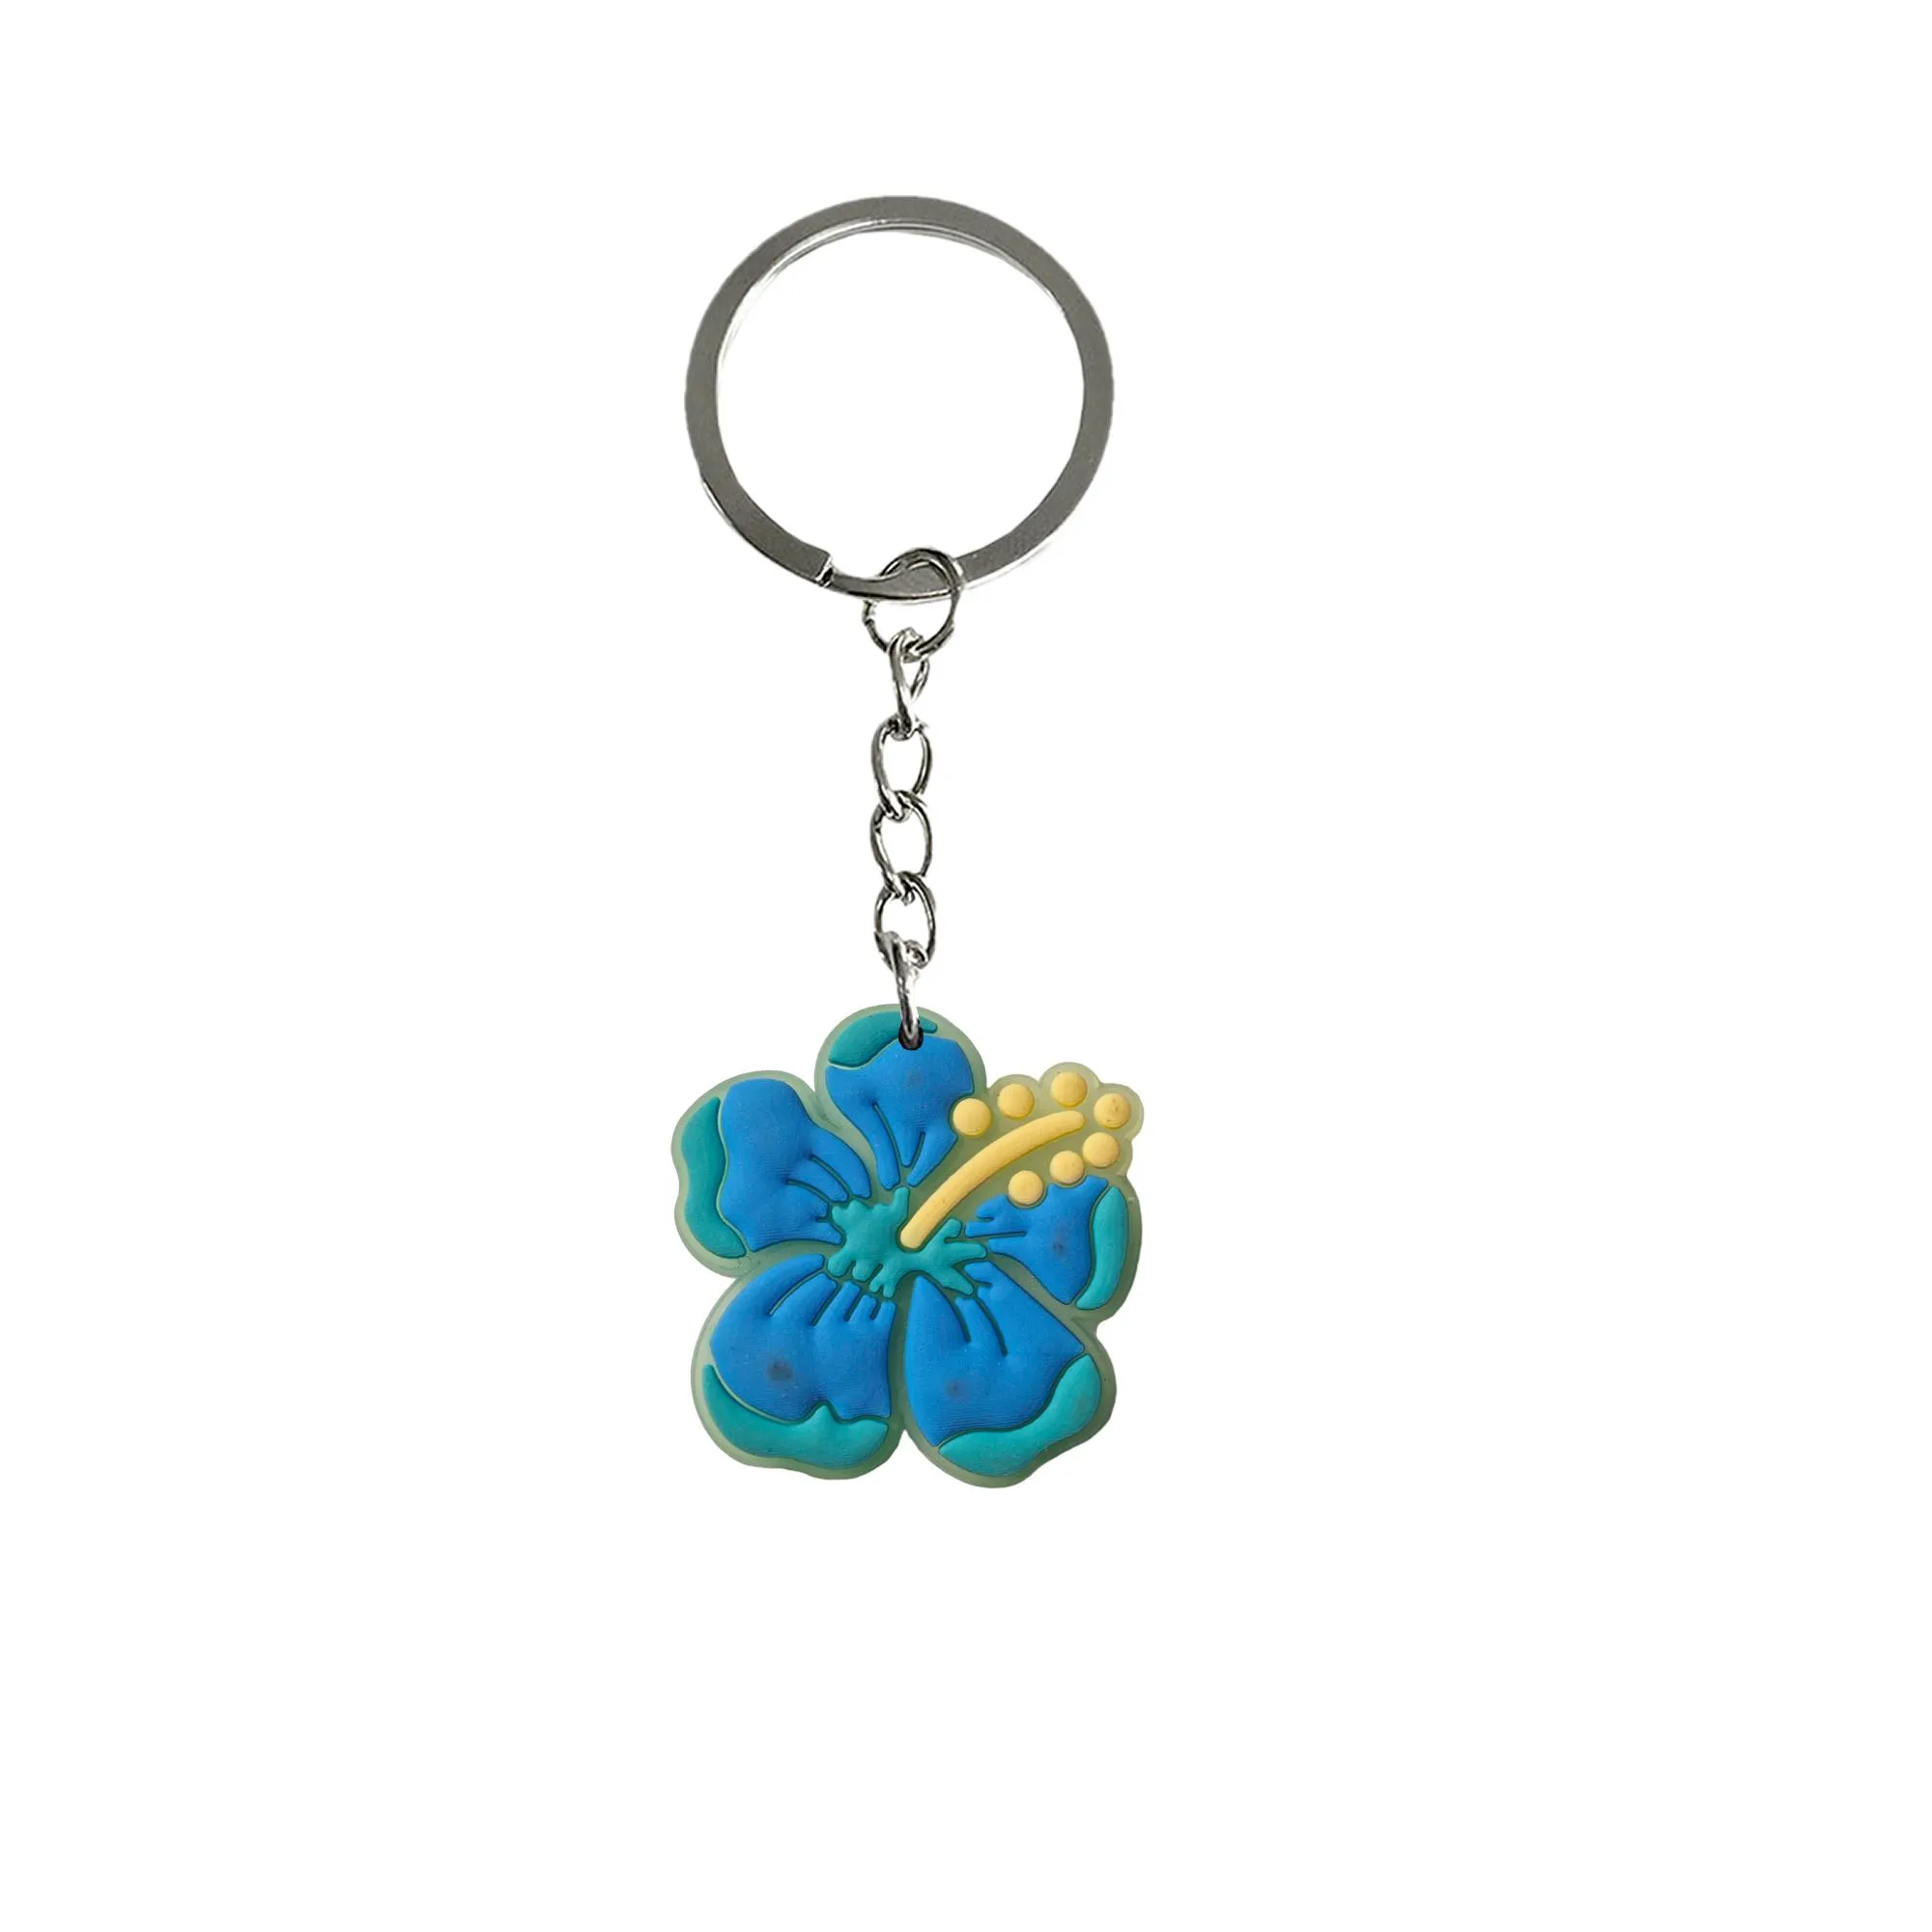 fluorescent pentapetal flower keychain key chain for party favors gift goodie bag stuffers supplies keyring classroom school day birthday suitable schoolbag cute silicone adult rings tags stuffer christmas gifts